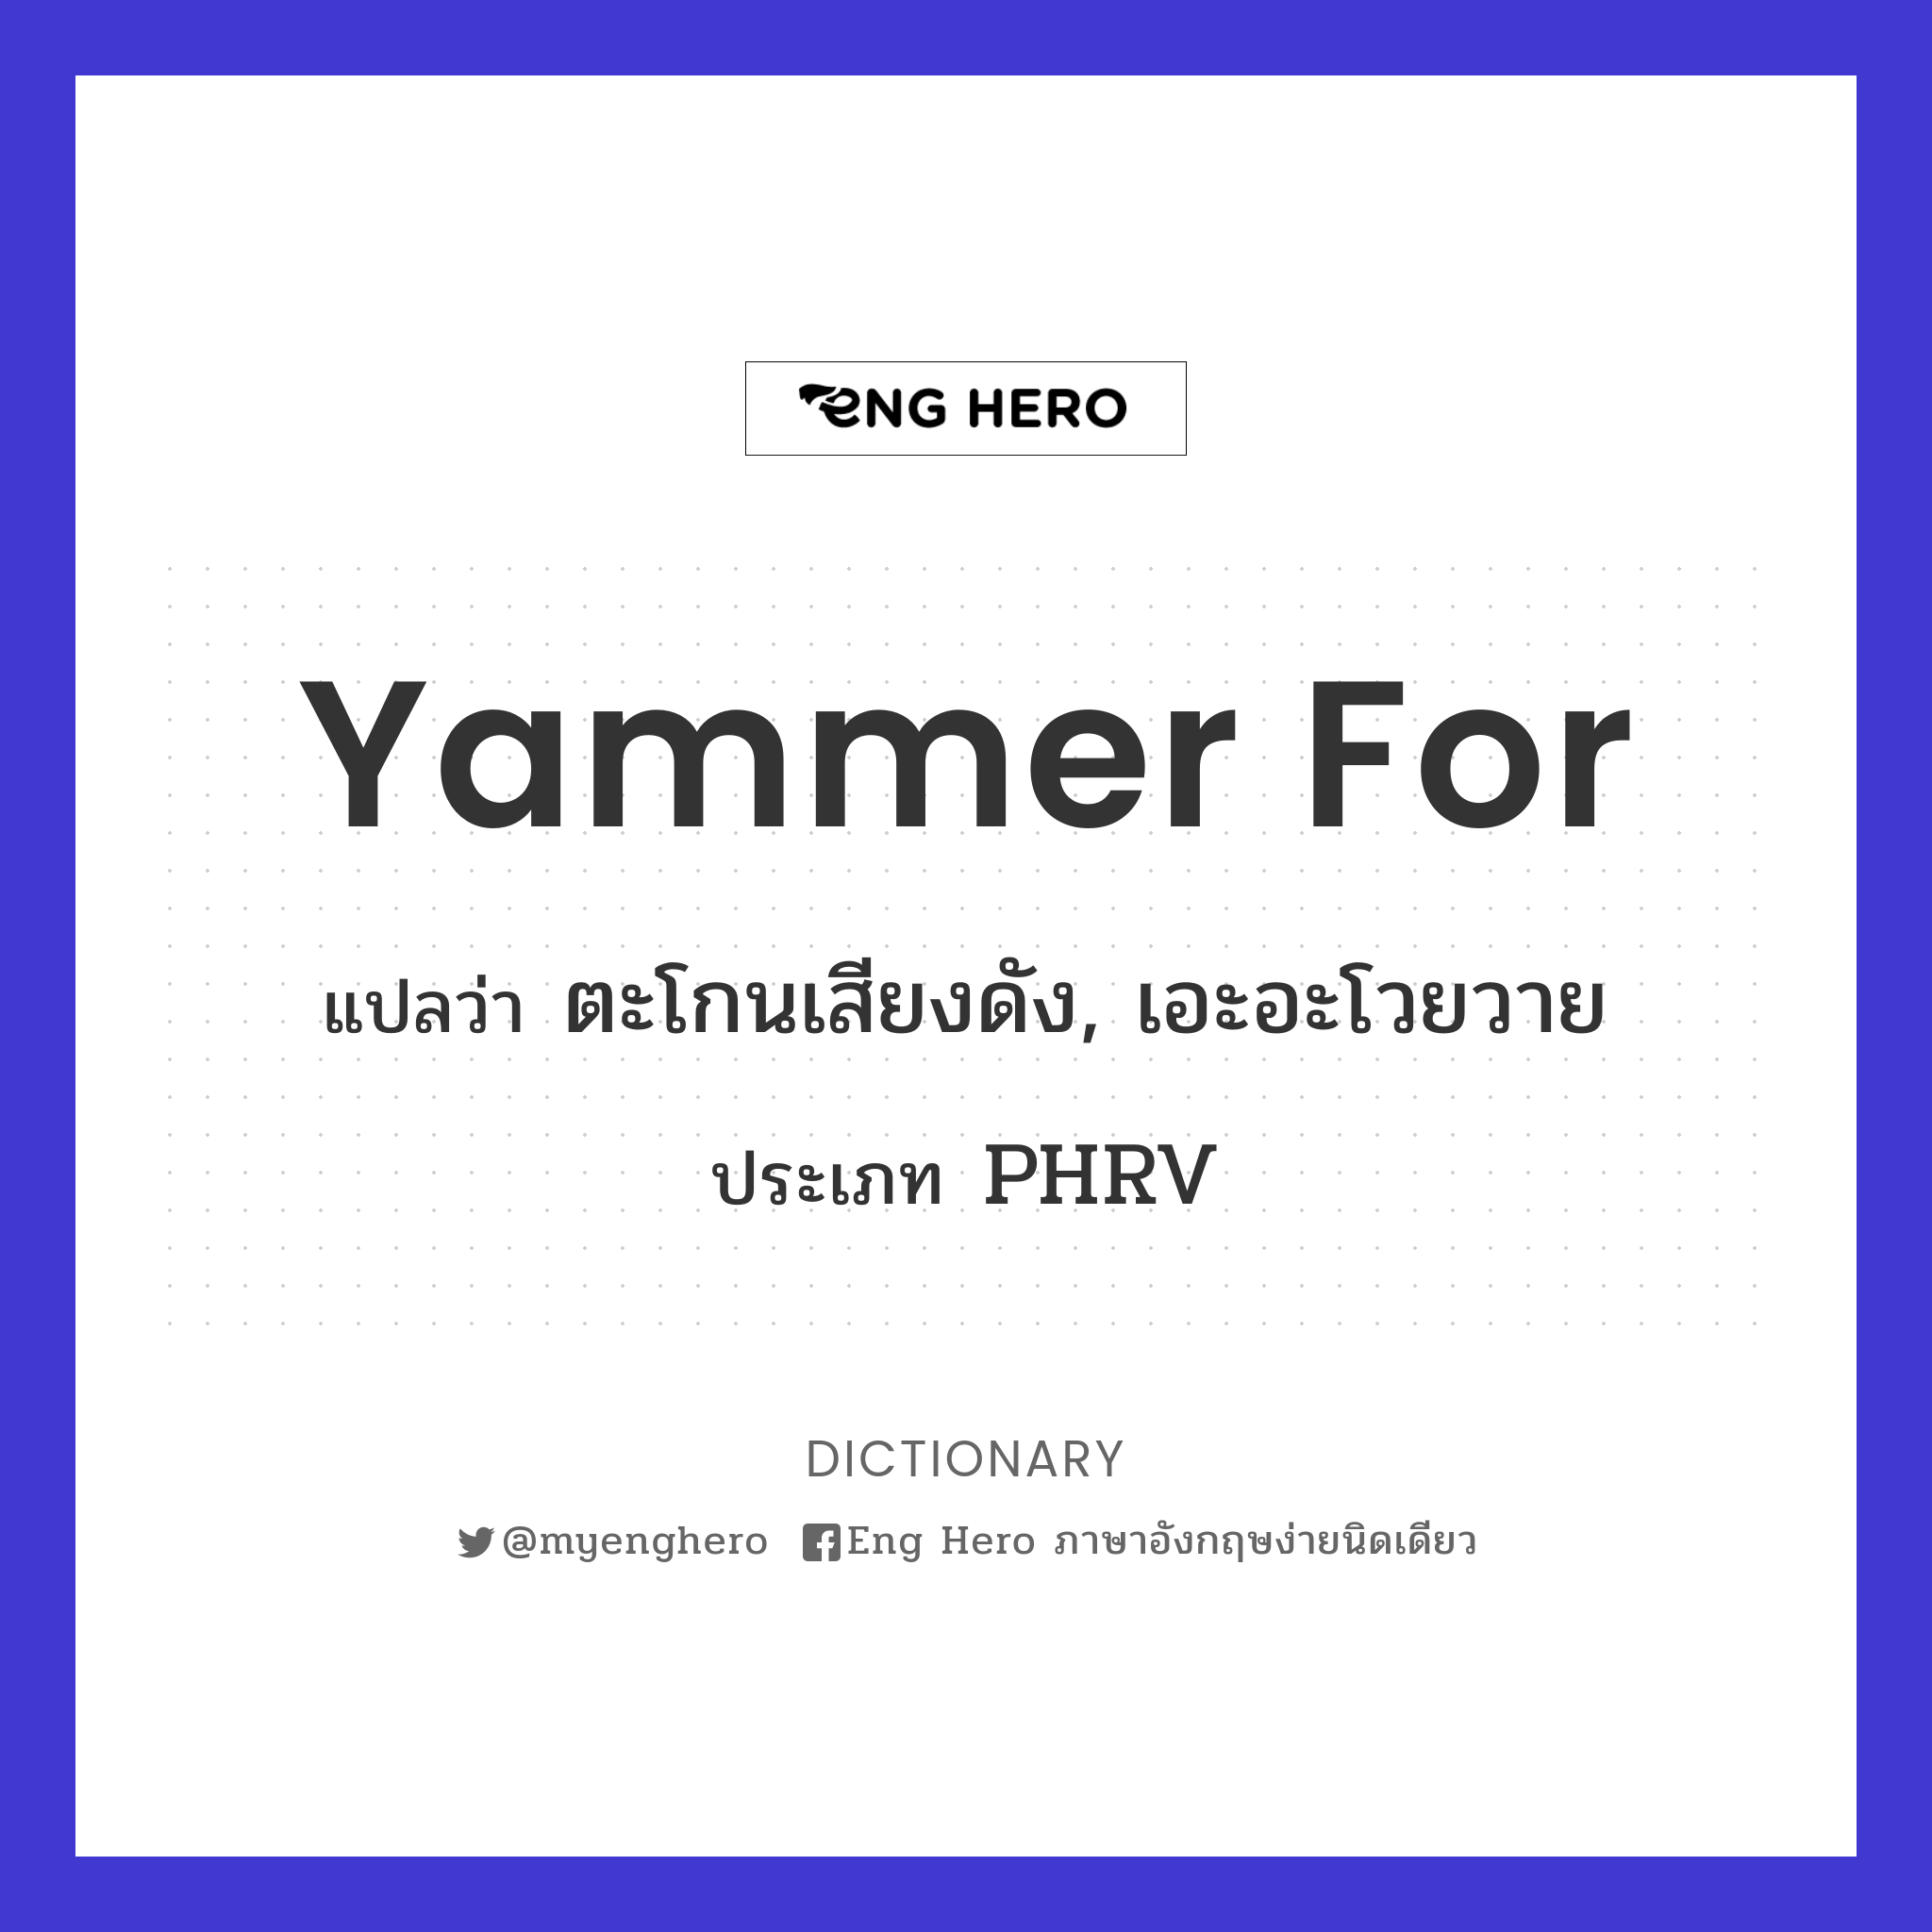 yammer for